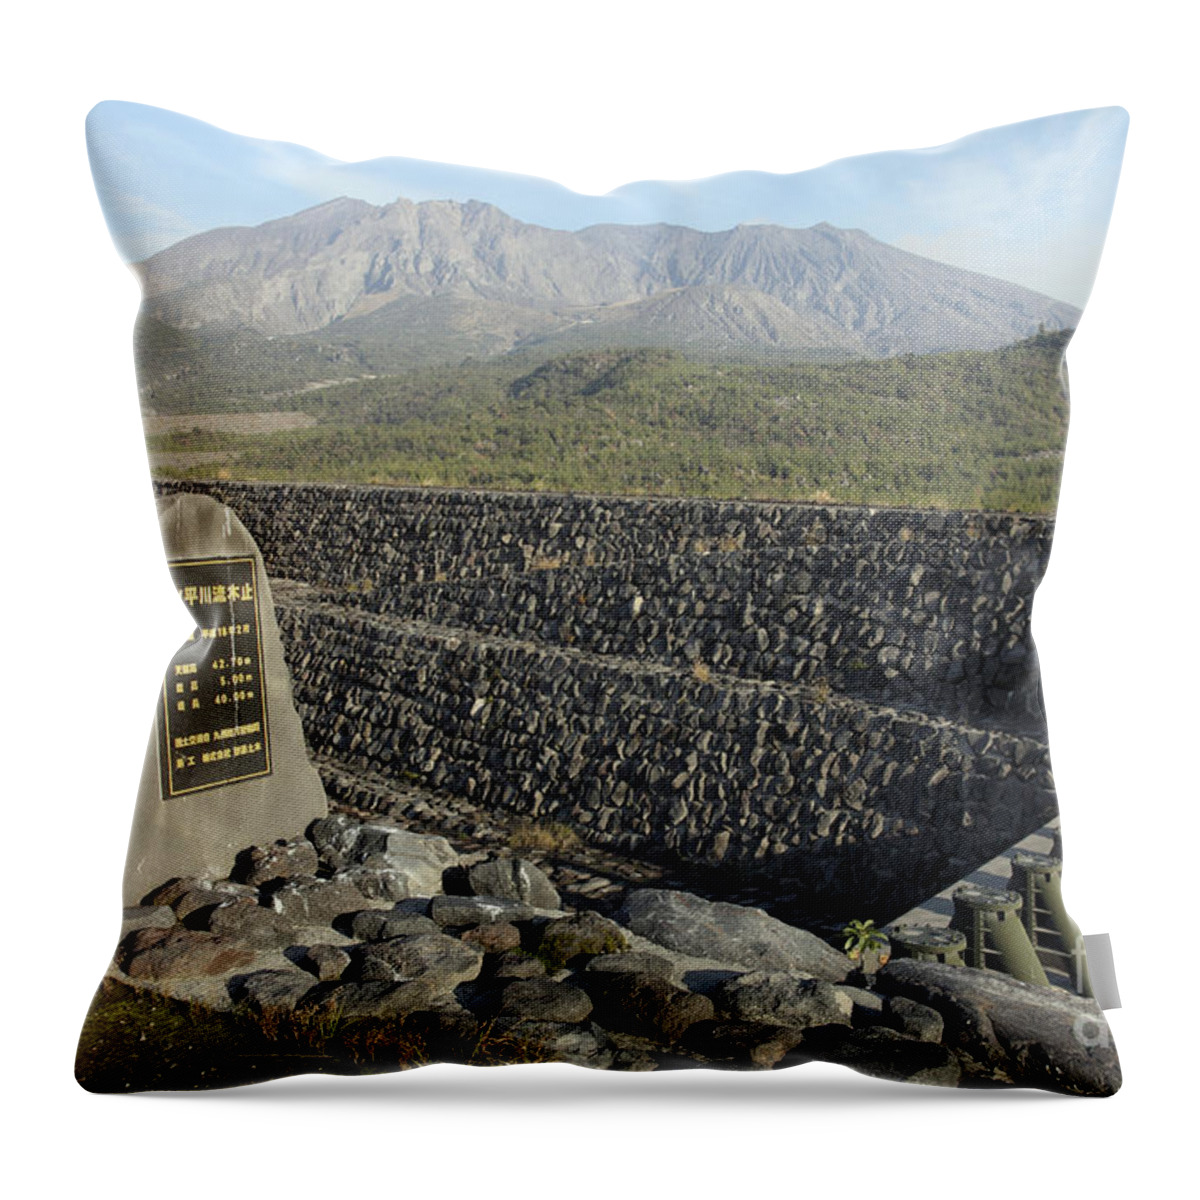 Structure Throw Pillow featuring the photograph Sabo Channel At Haramatsu River by Richard Roscoe